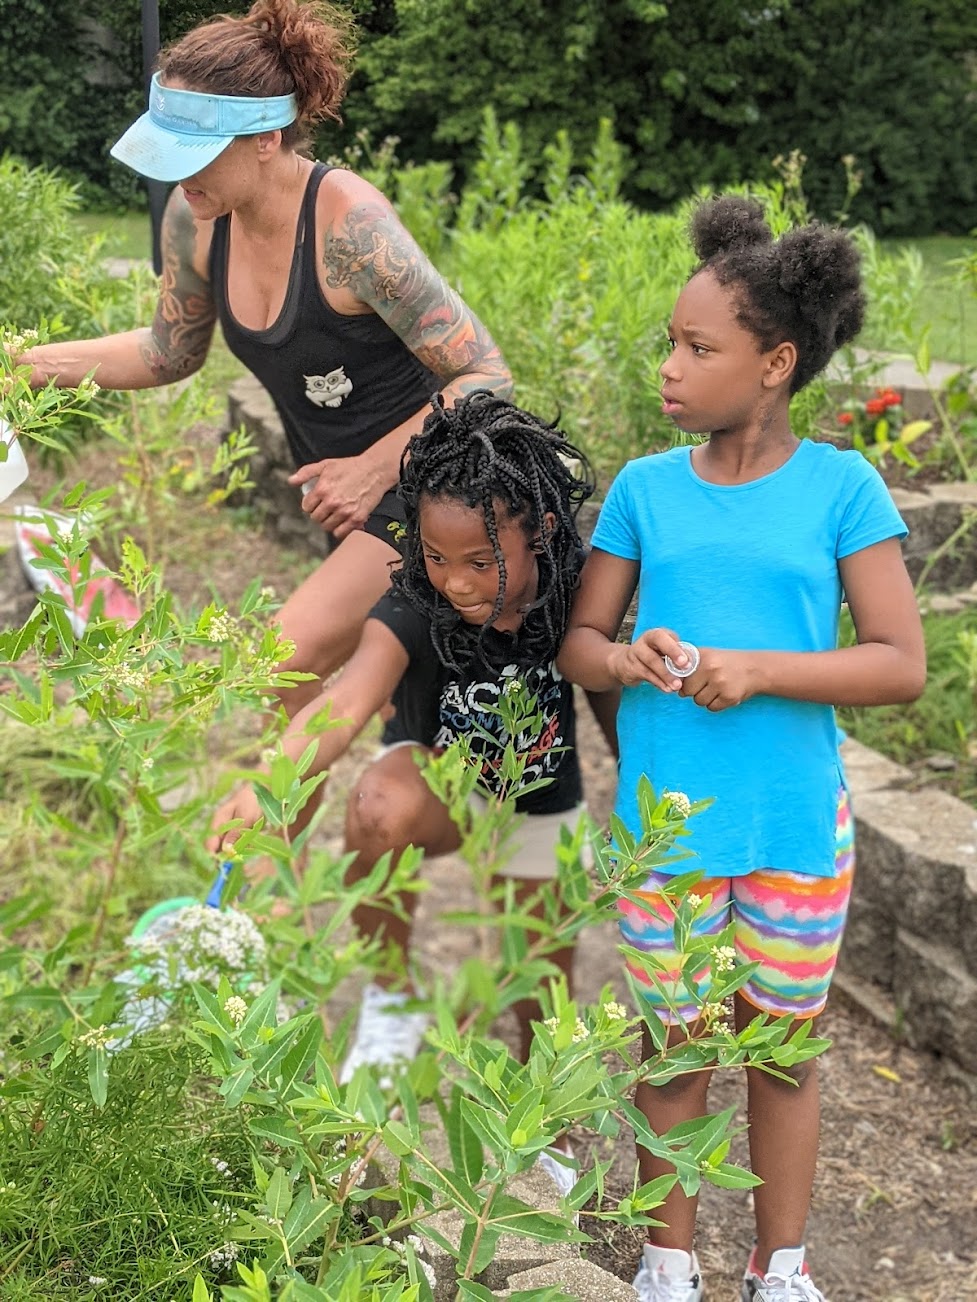 Two young children and a Sierra Club staff member explore a Monarch butterfly garden.